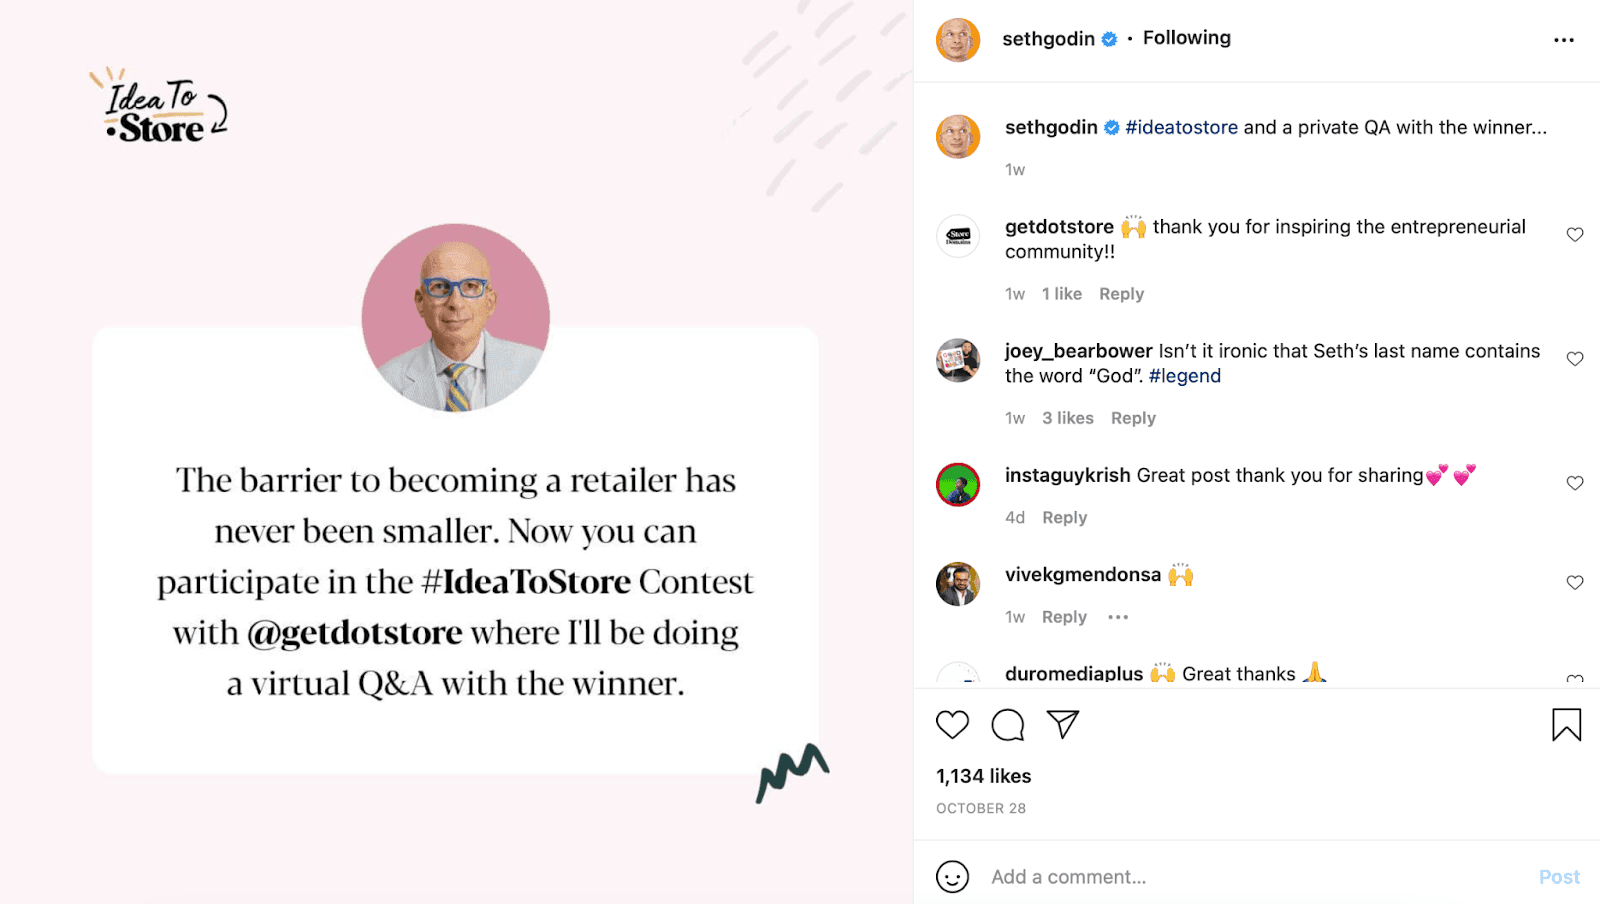 Thought leadership on Instagram